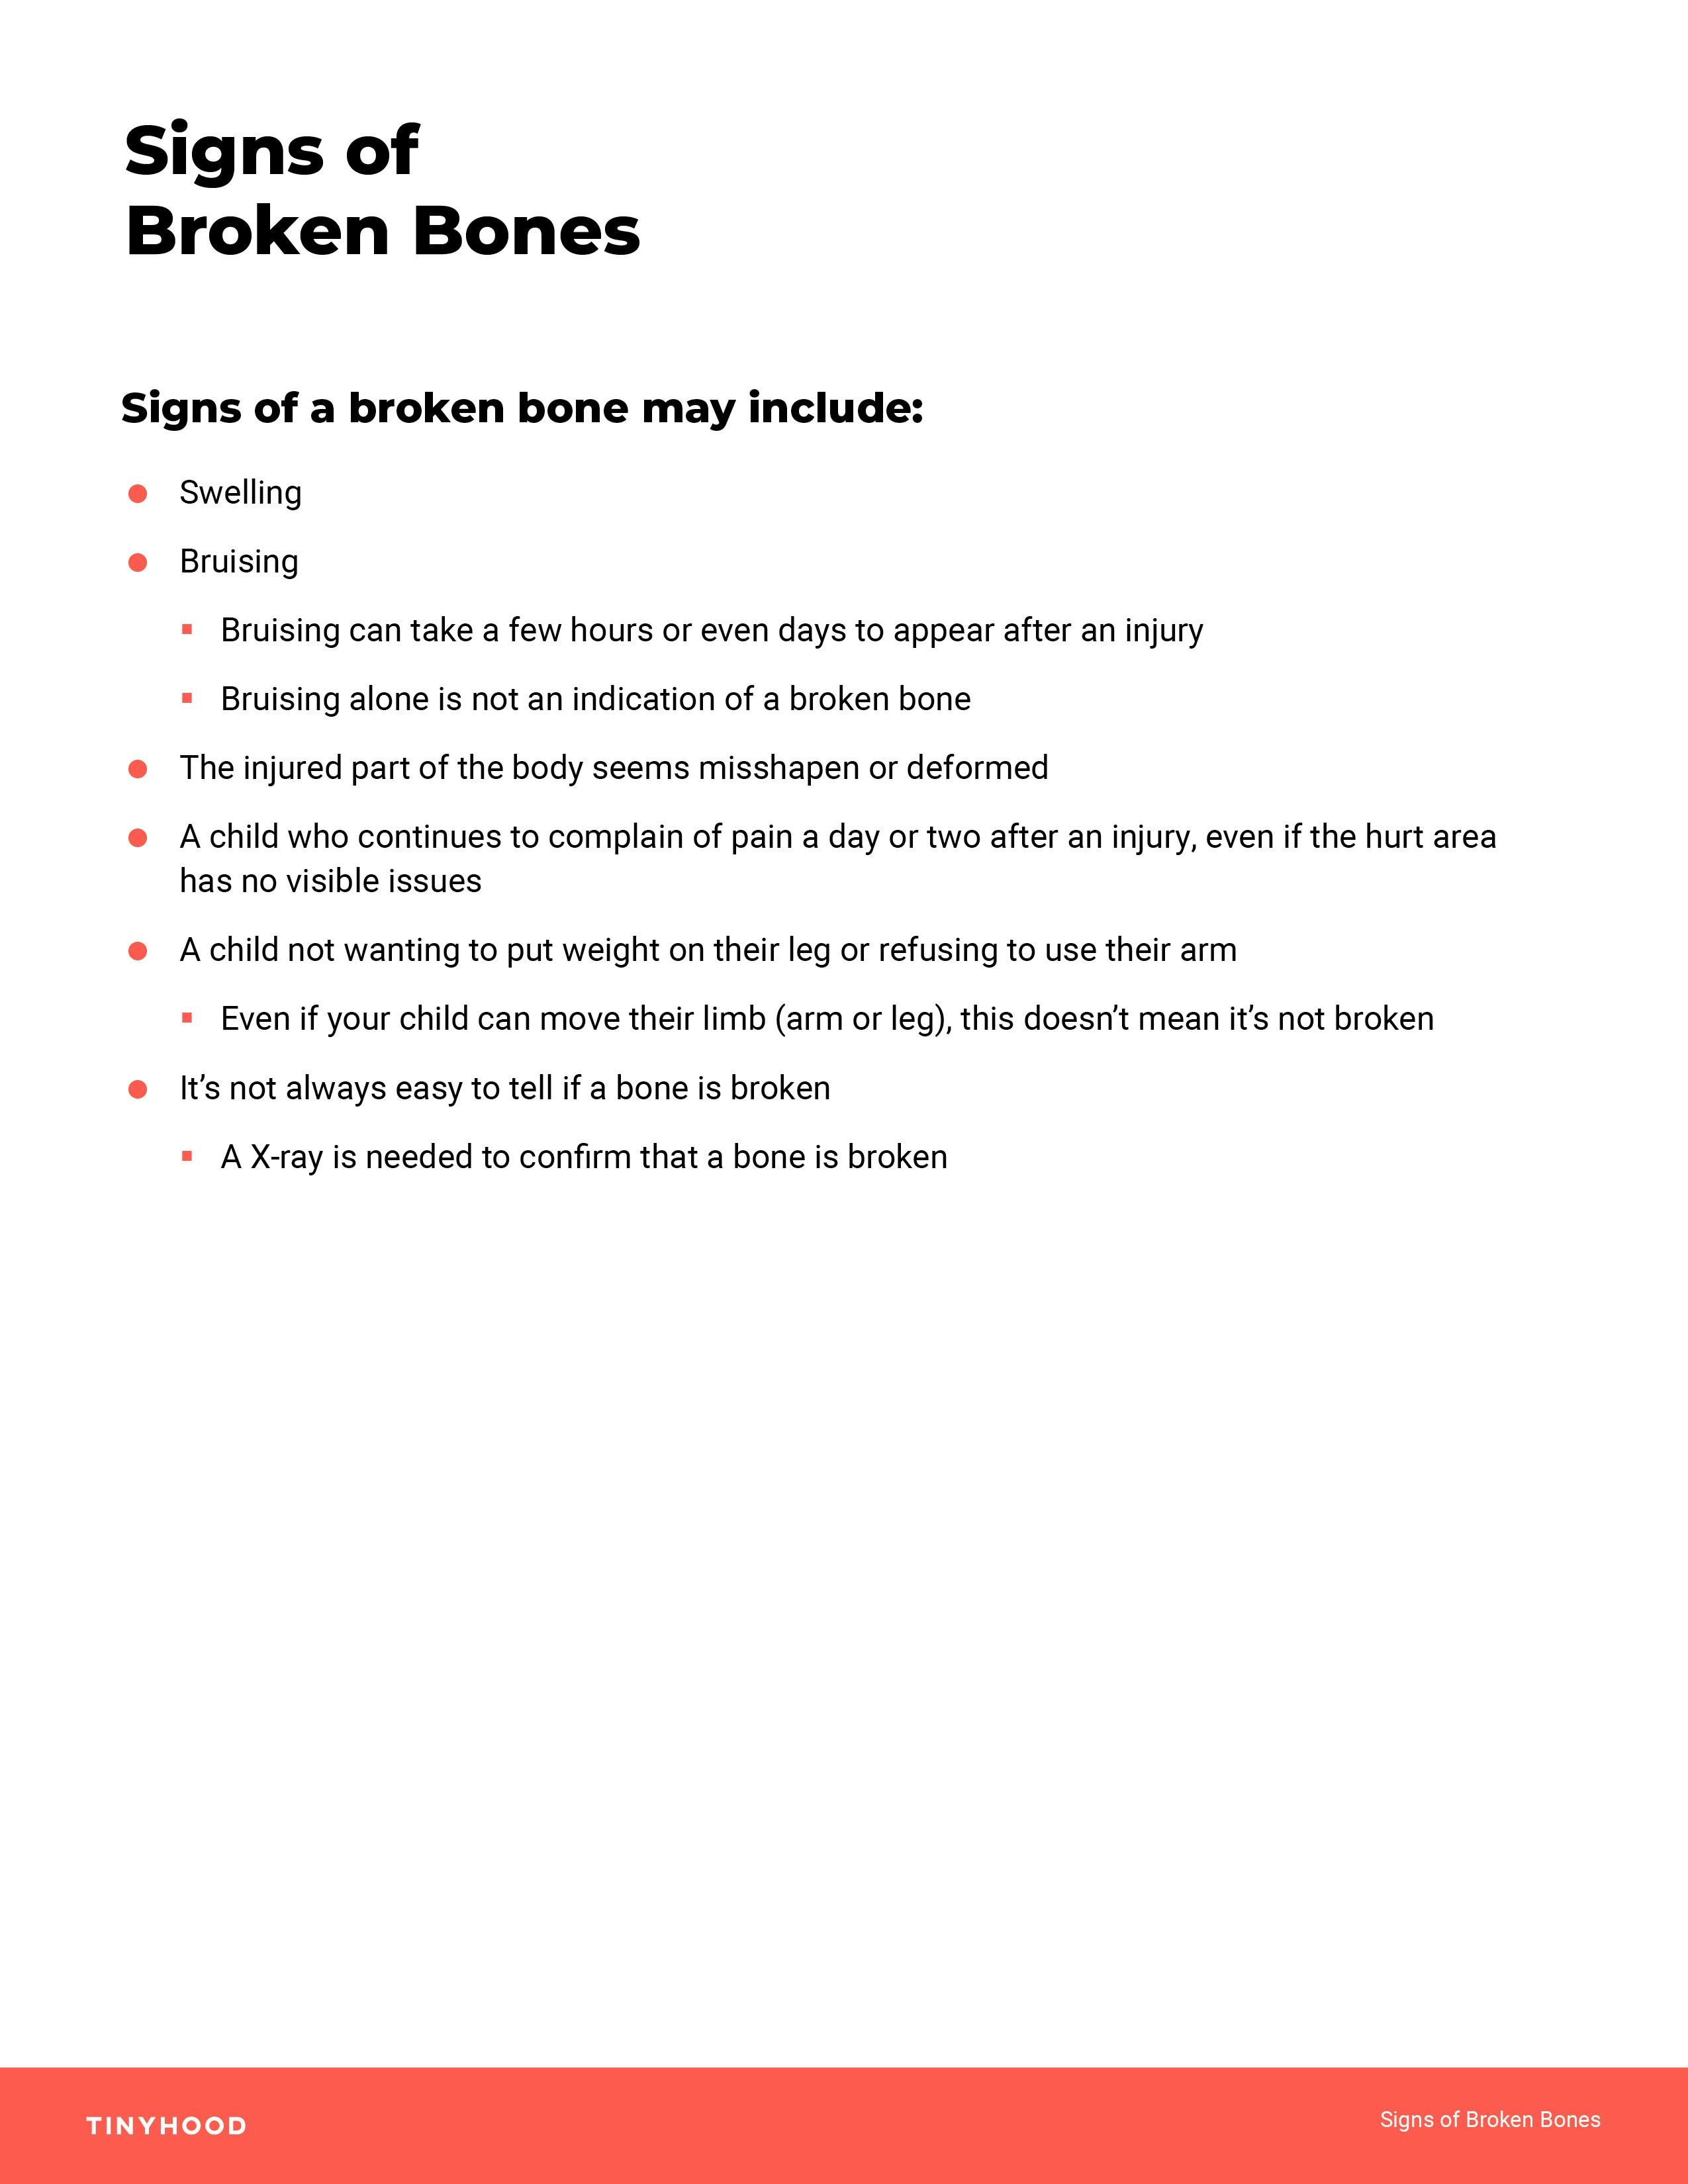 Preview image of Handout: Signs of a Broken Bone